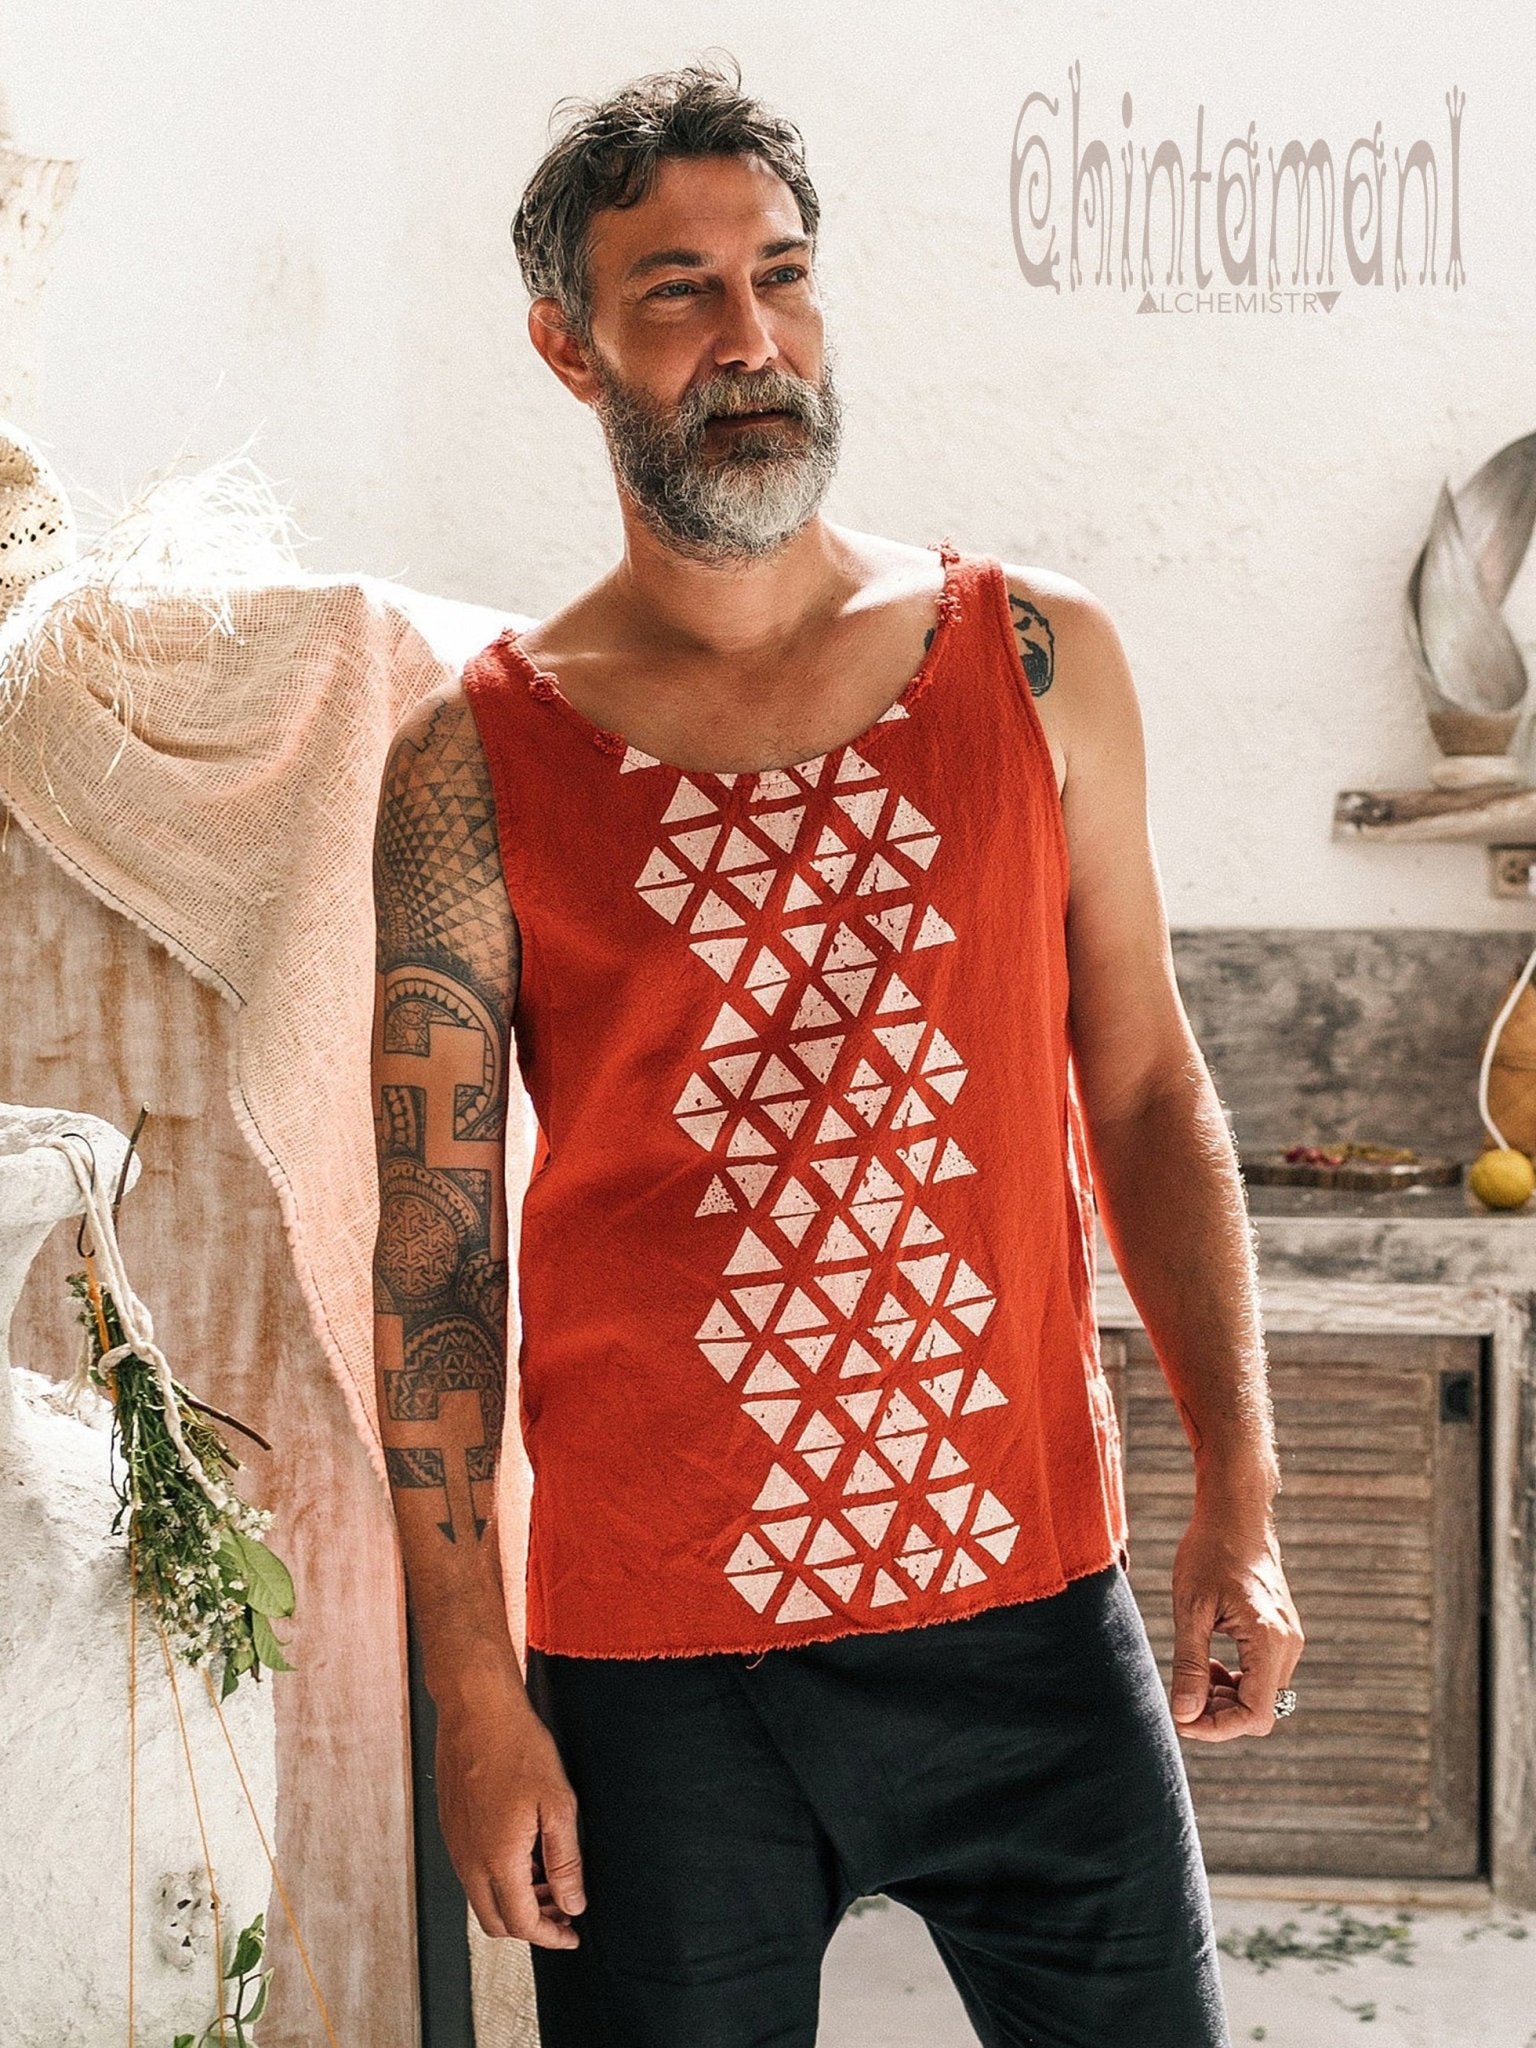 Cotton Tank Geometric Red – Top Men for / with Screen ChintamaniAlchemi Ochre Print Nomad